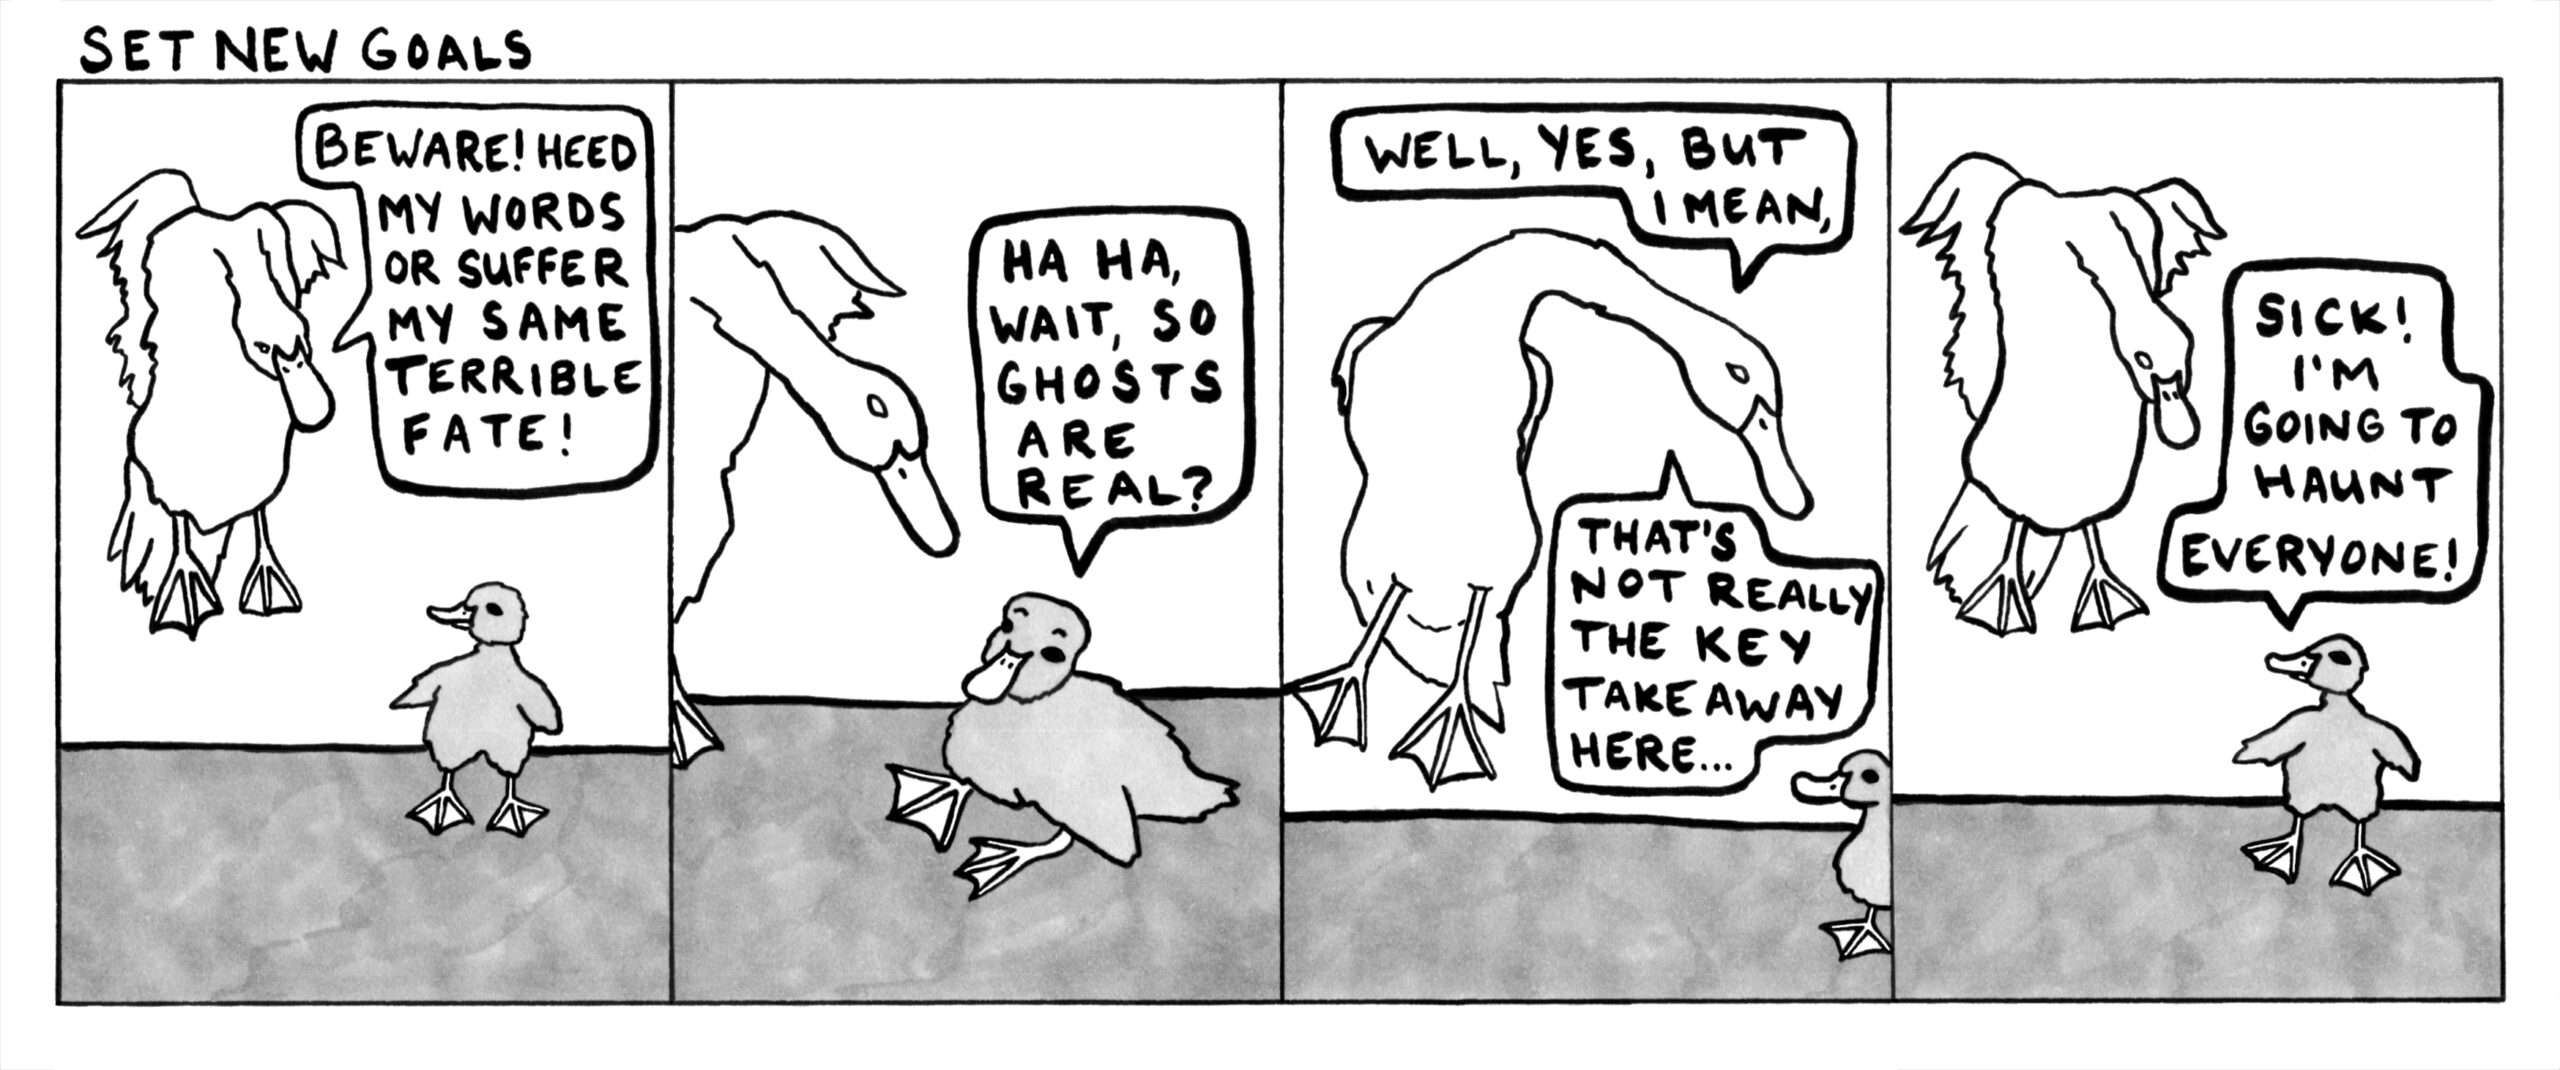 Being a ghost’s not so scary if you’re already haunted